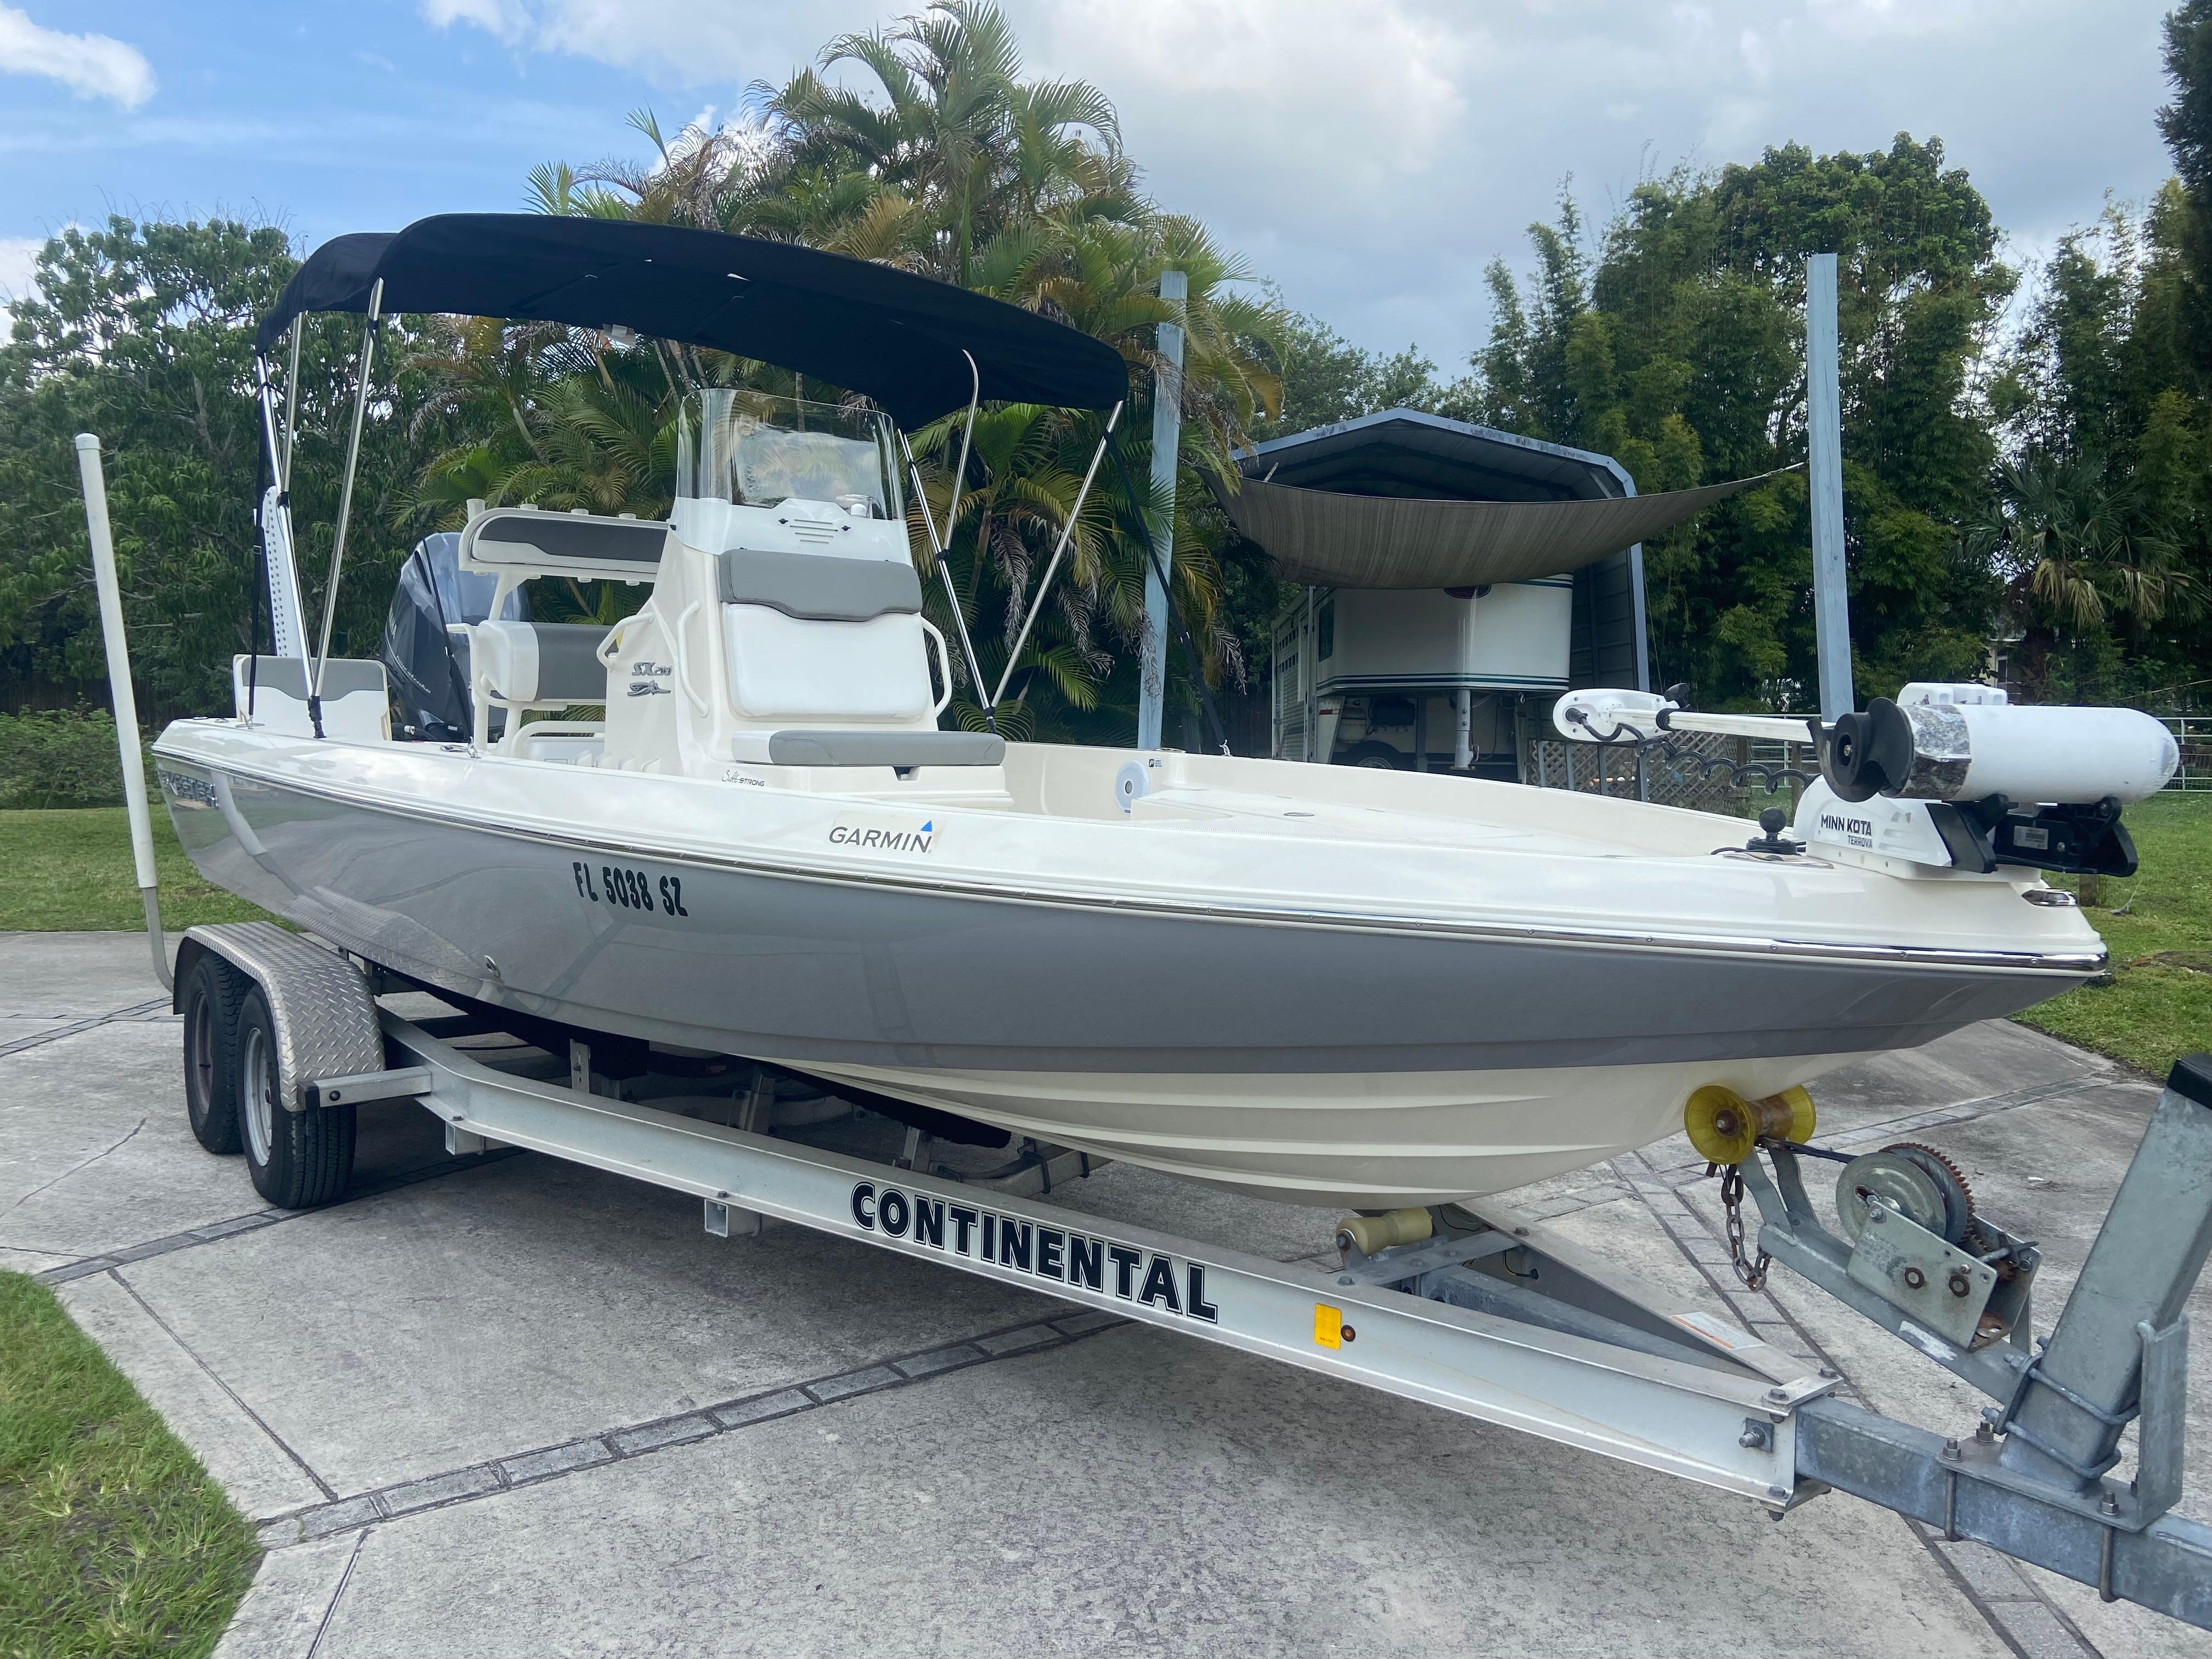 Explore Skeeter 2250 Zx Boats For Sale - Boat Trader